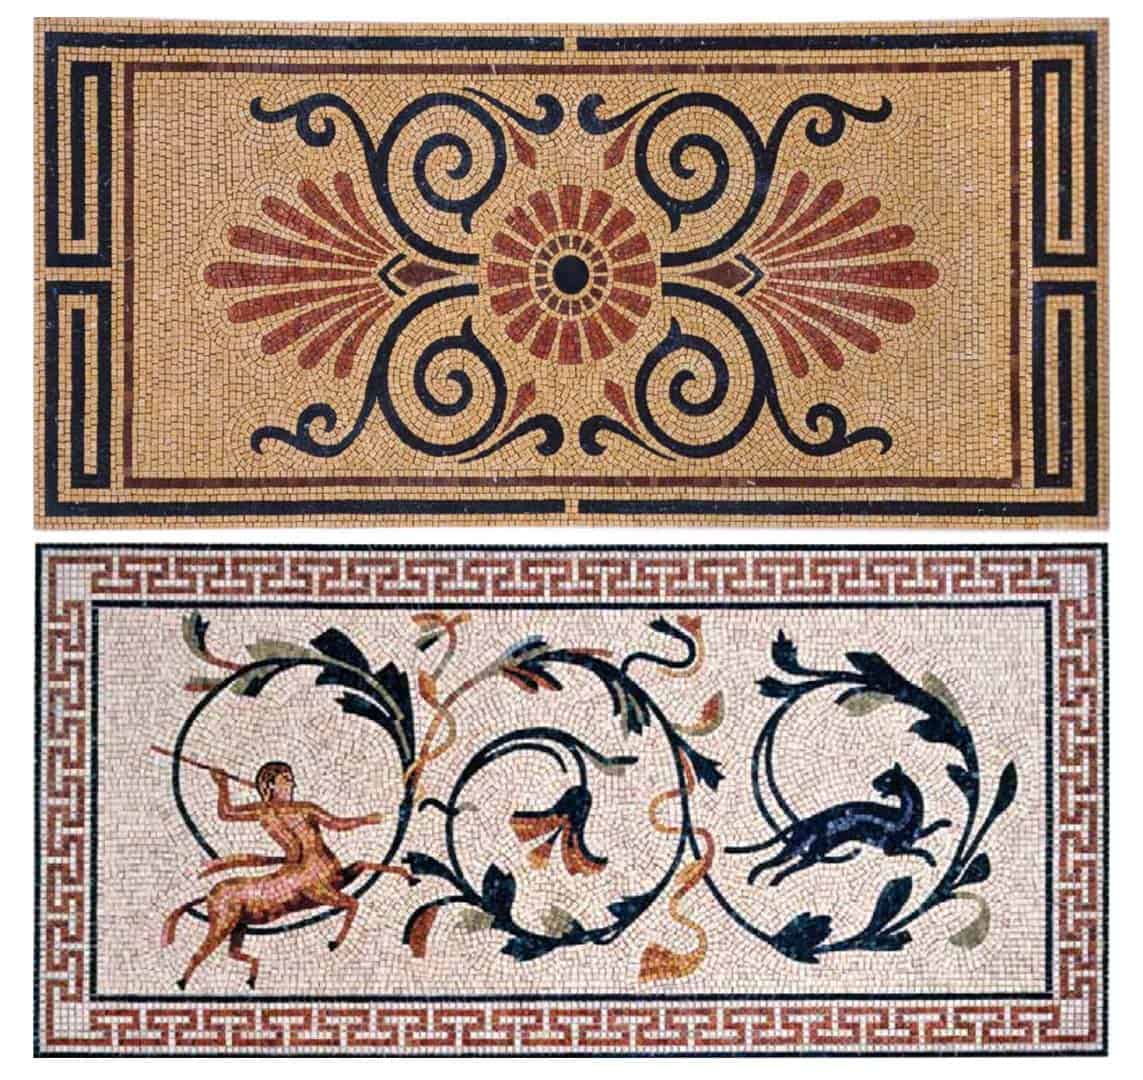 Ethnic mosaic has a symmetrical floral and geometric pattern in earth tones. The bottom mosaic shows a mythological scene with a figure shooting an arrow at a deer, surrounded by elaborate floral and vine designs